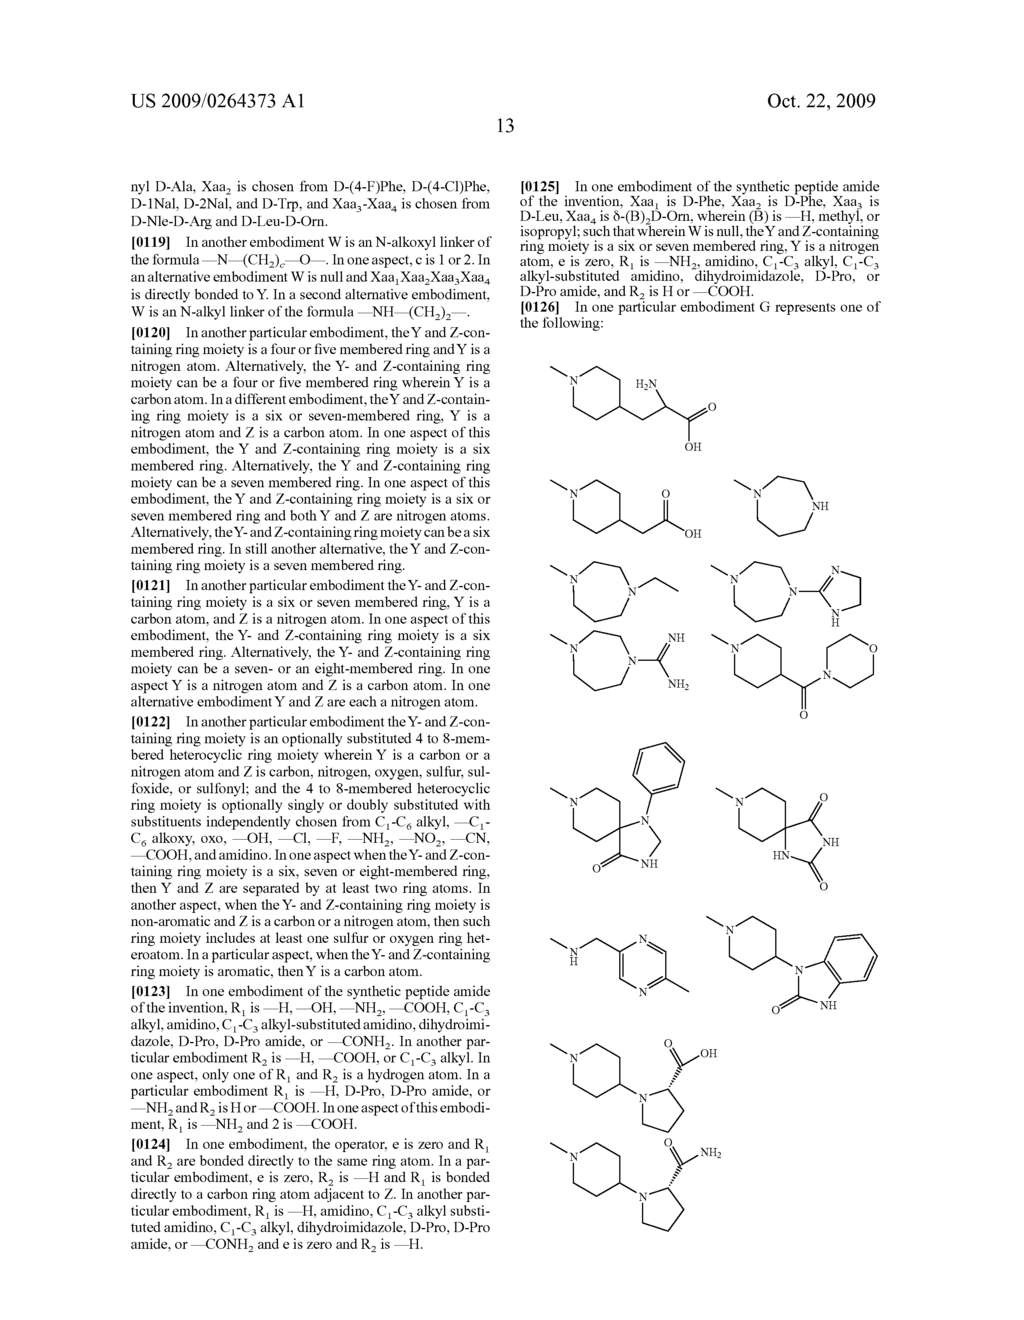 SYNTHETIC PEPTIDE AMIDES AND DIMERS THEREOF - diagram, schematic, and image 24